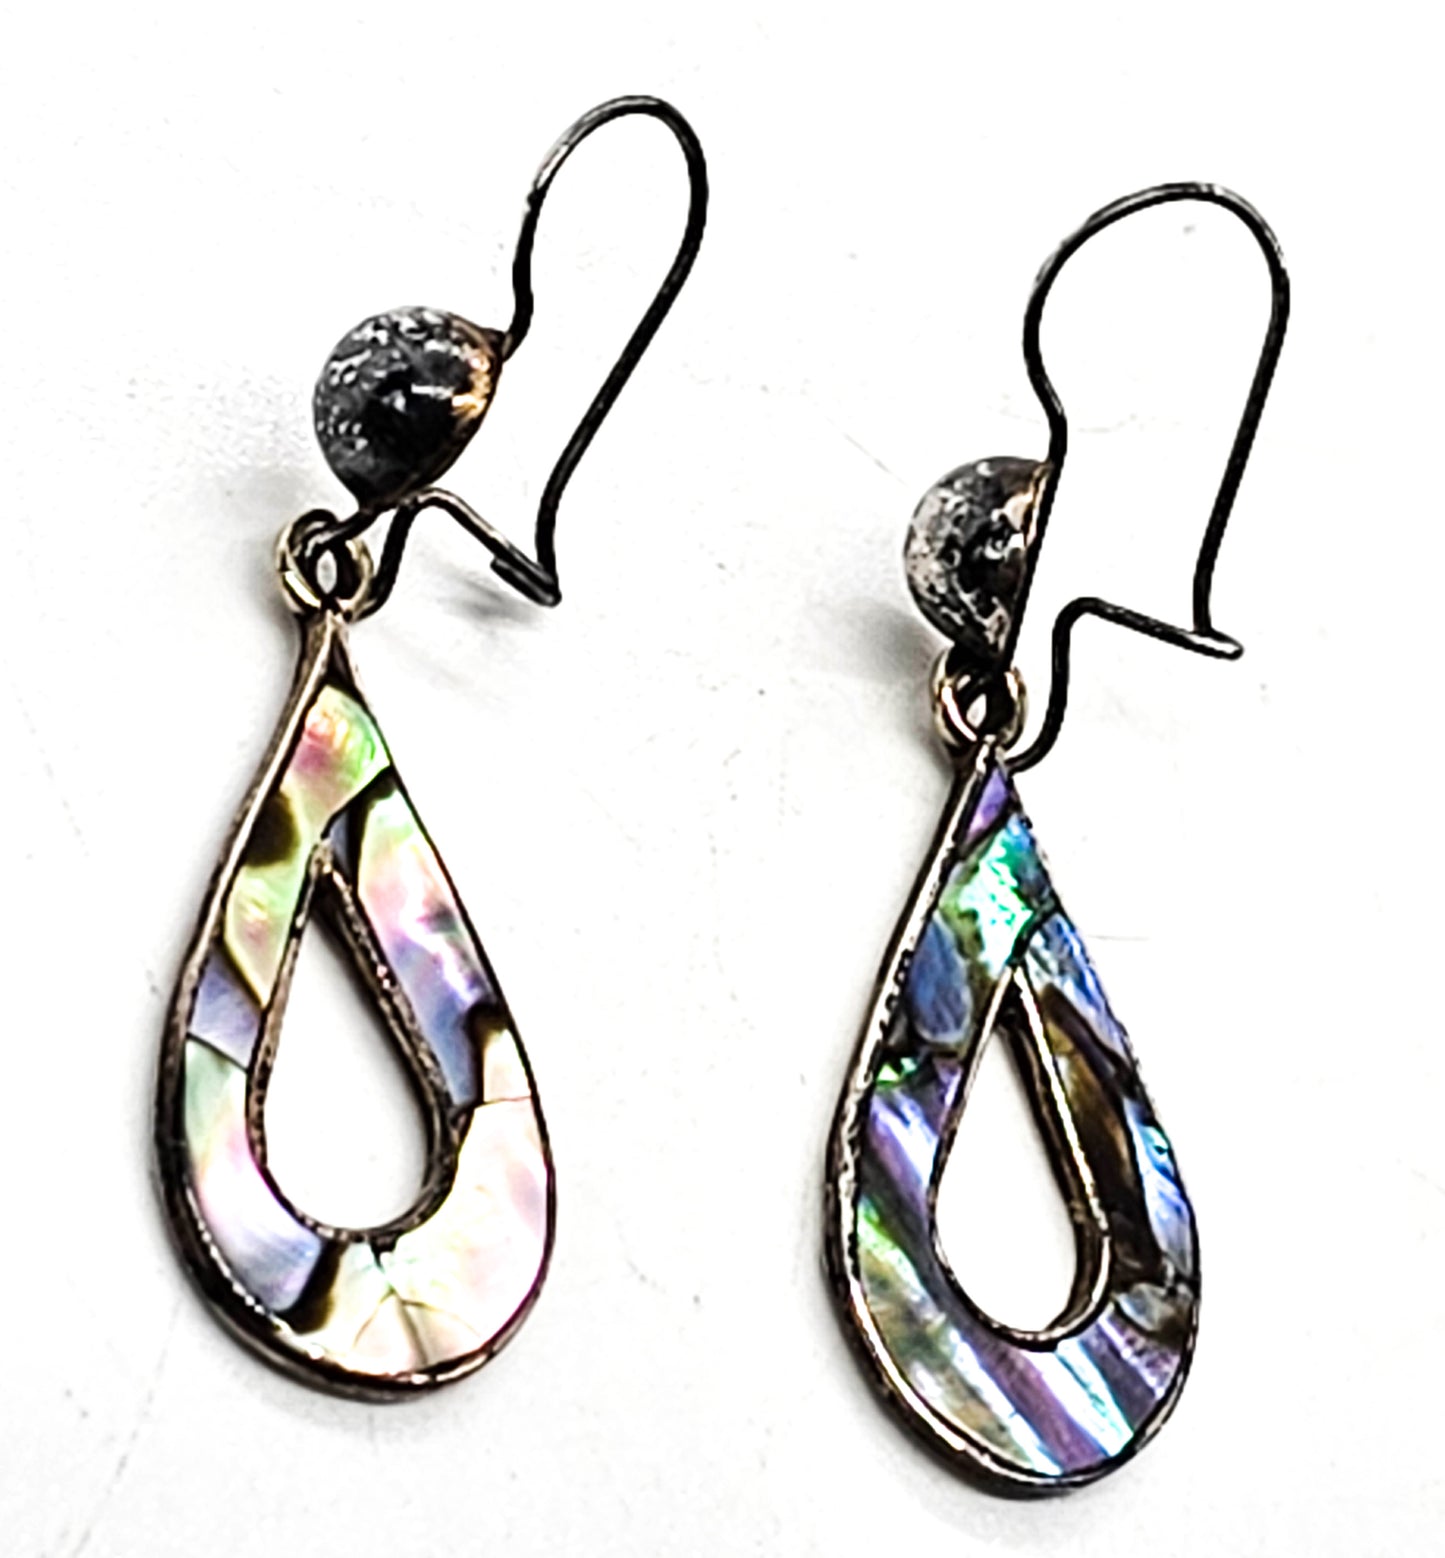 Abalone Paua Taxco Mexico Eagle stamp CPI vintage sterling silver drop hoop earrings